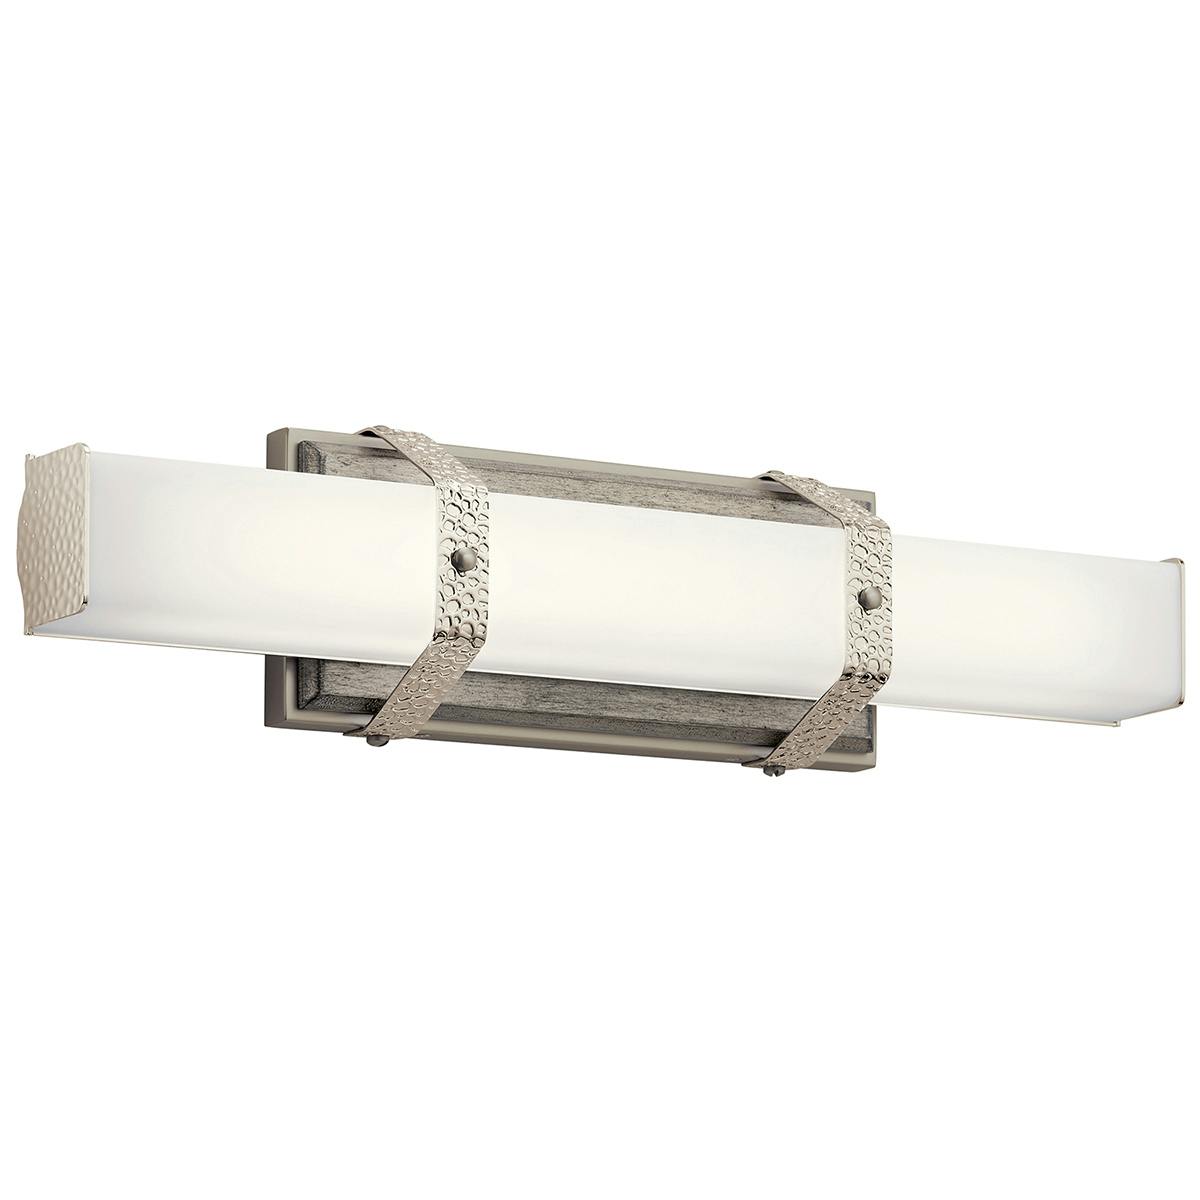 Product image of the 45707PNLED shown hung horizontally